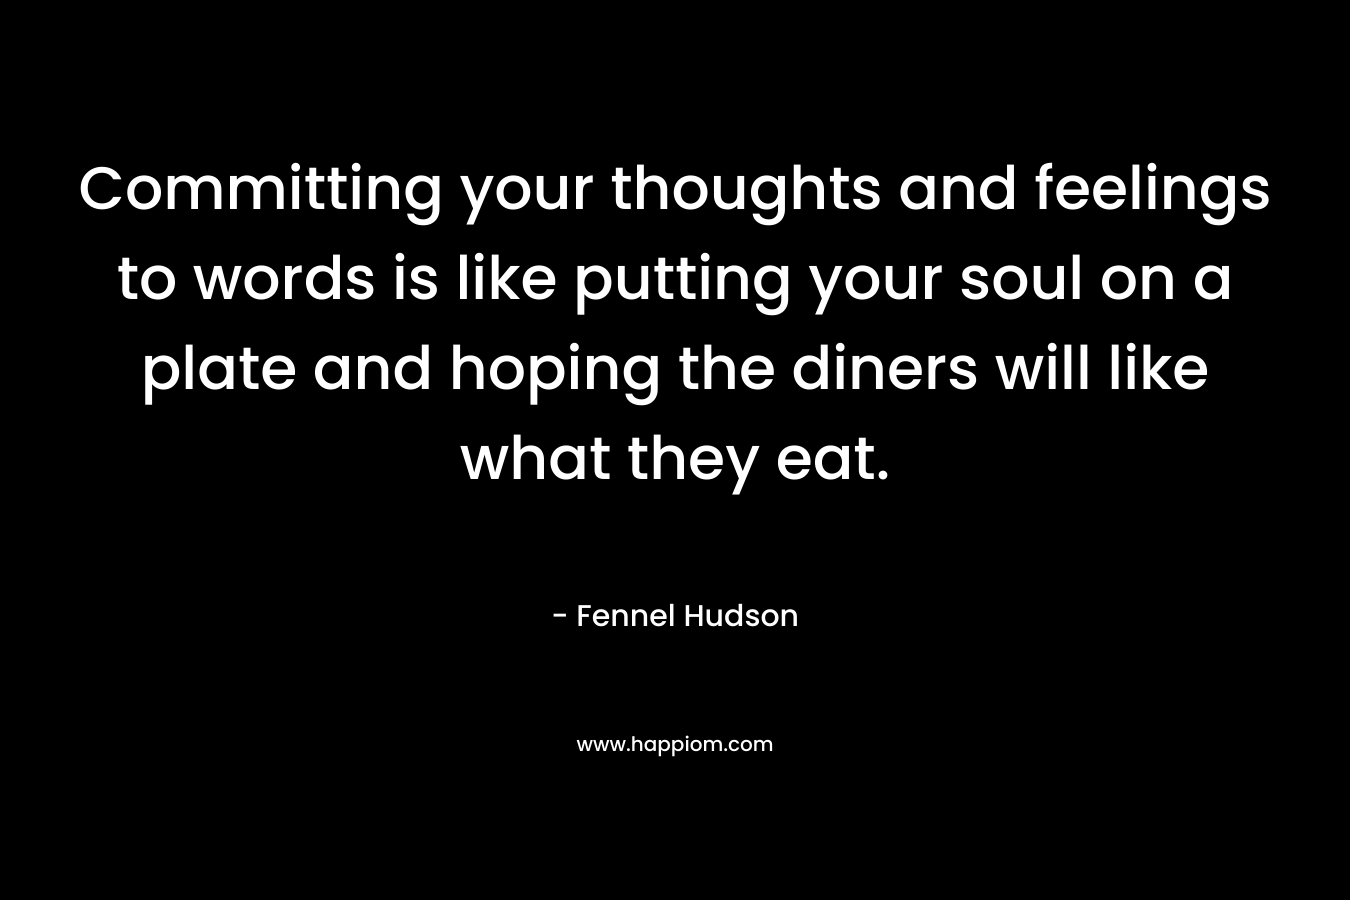 Committing your thoughts and feelings to words is like putting your soul on a plate and hoping the diners will like what they eat.